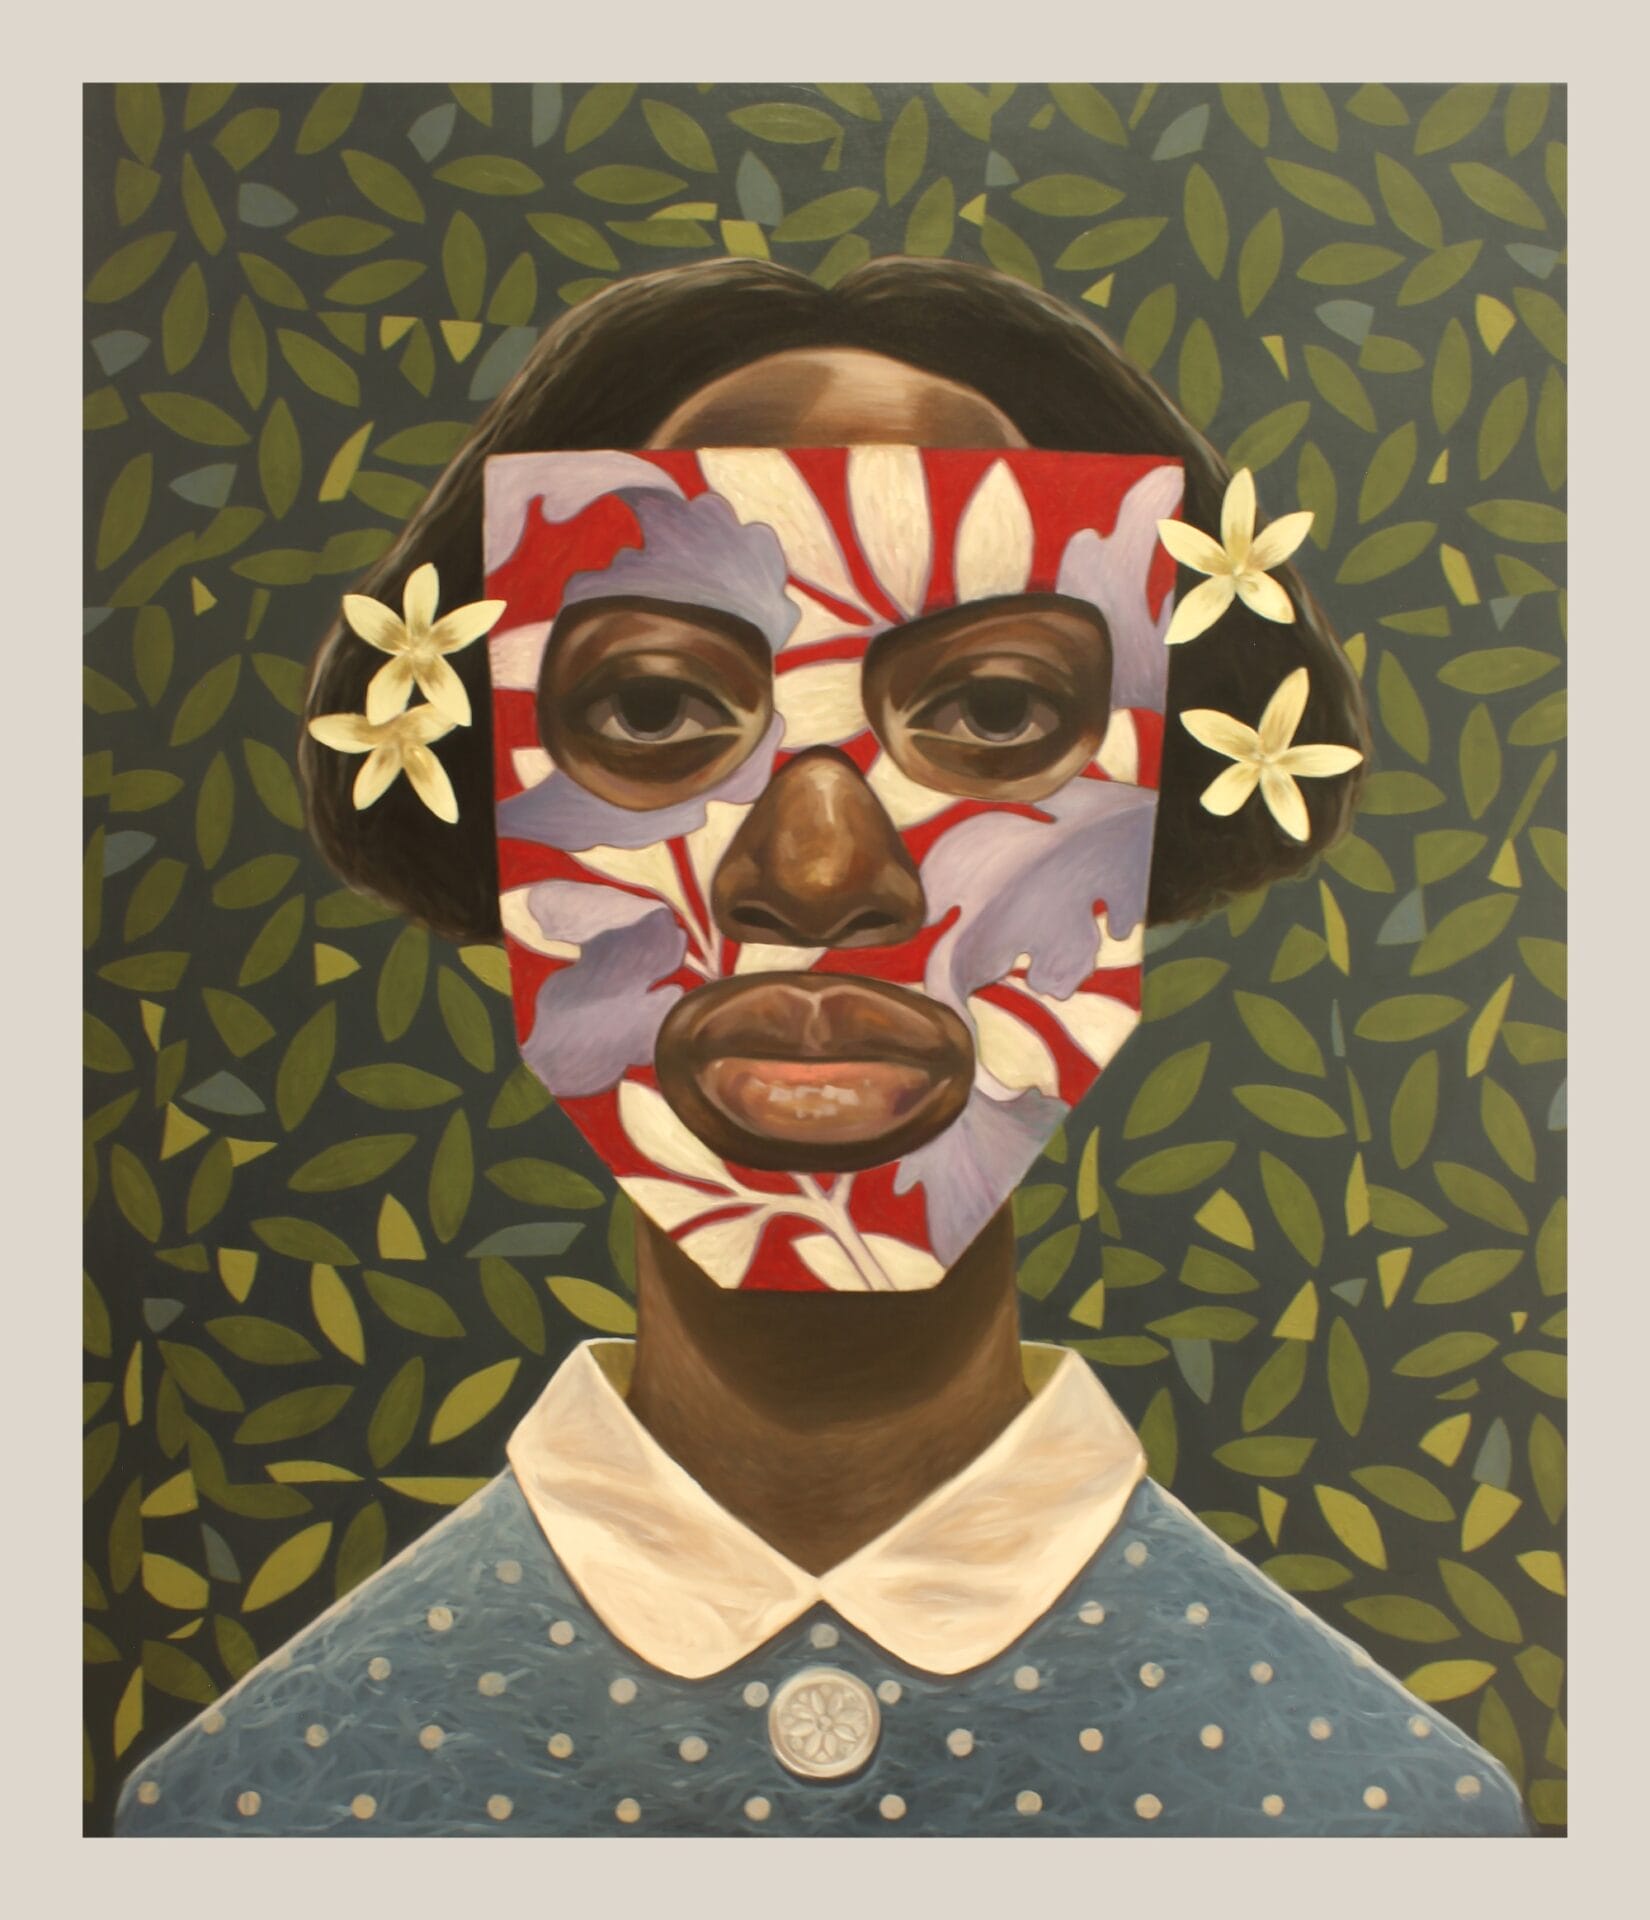 an oil painting of an imagined young black woman wearing a white and blue dress, in front of a green leafy background, wearing a patterned mask and flowers in her hair